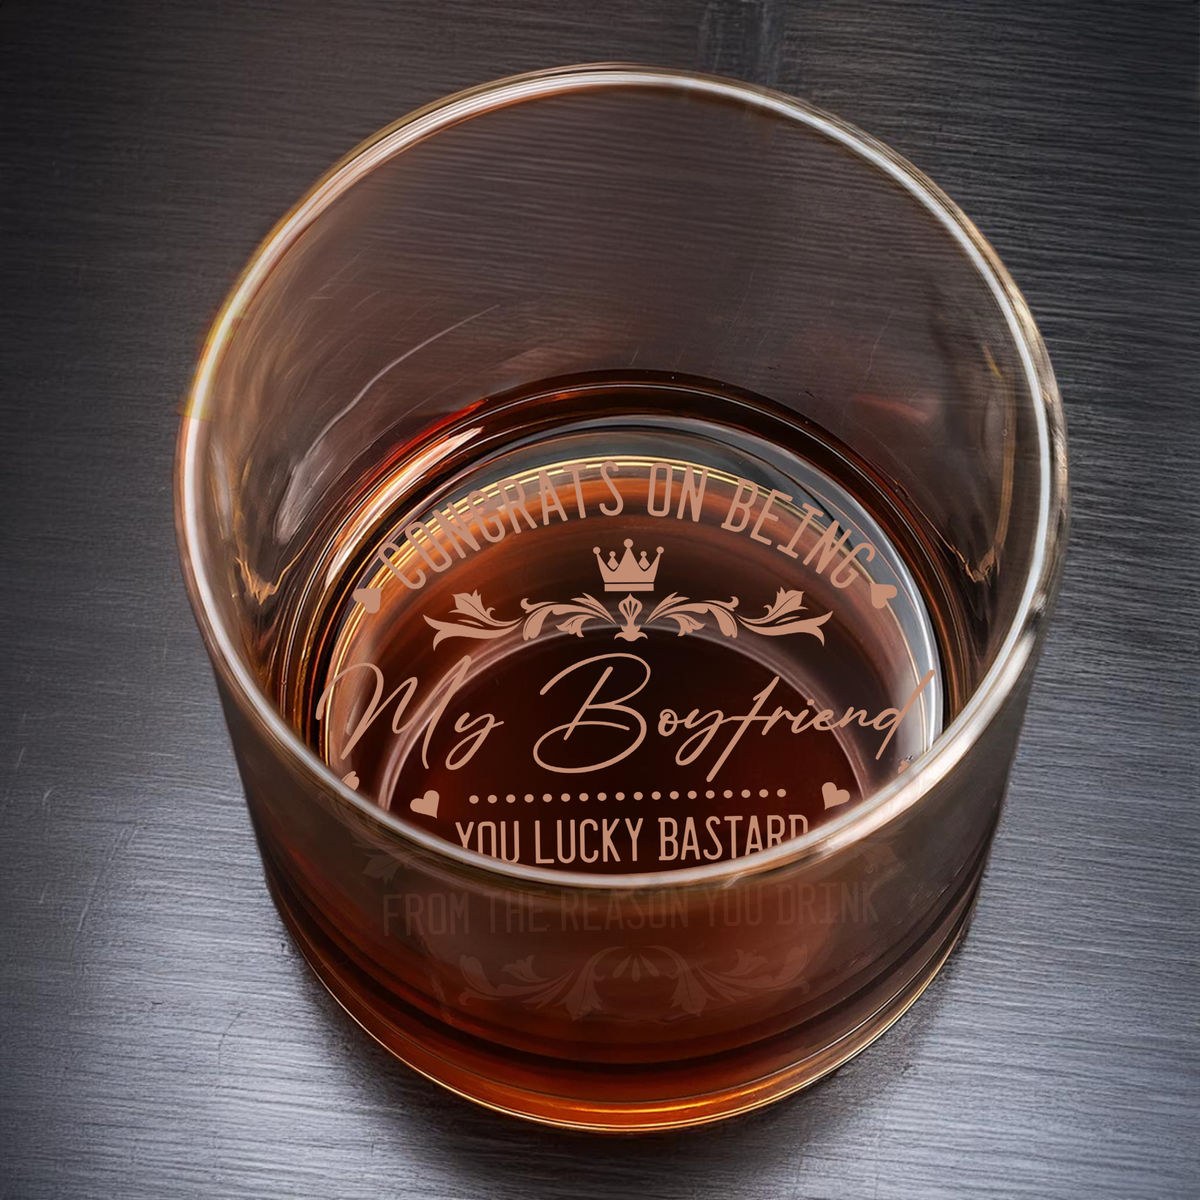 Couple Gifts - Congrats on being my Boyfriend. You lucky bastard from the reason you  drink. - Gifts For Dad, Husband, Boyfriend... - Gifts For Father's Day, Birthday, Anniversary - Personalize Whiskey Glass_4